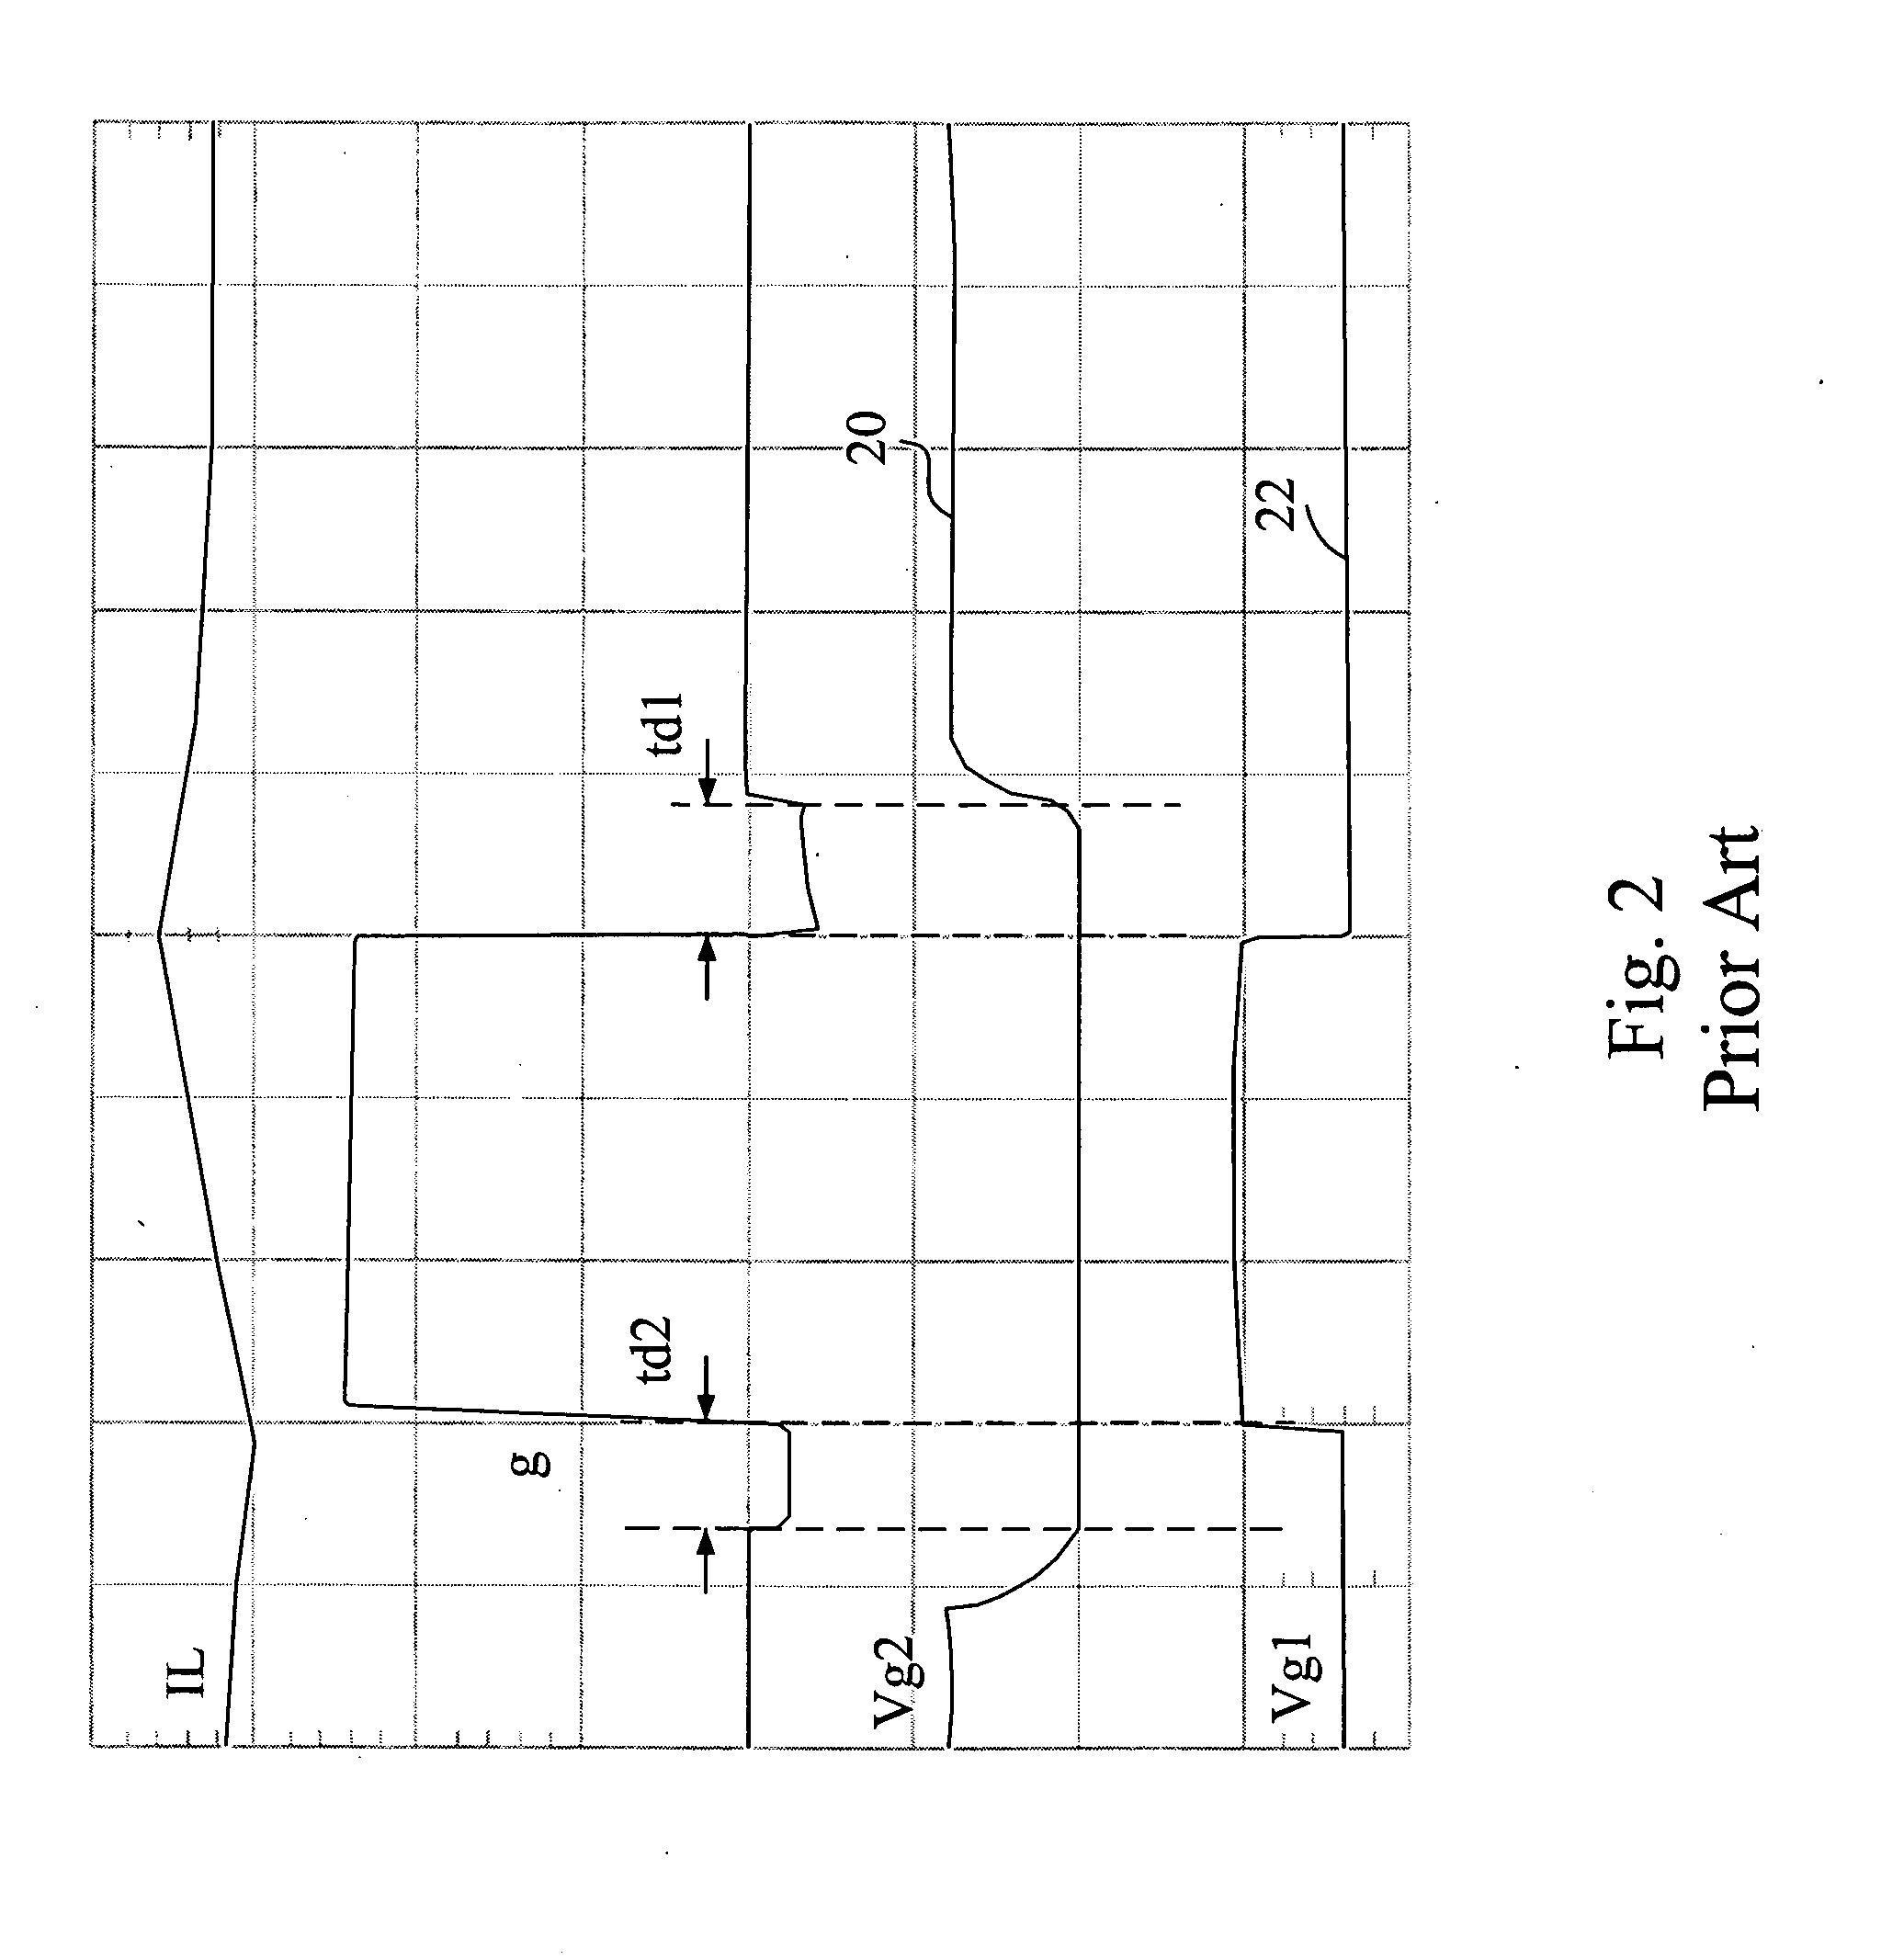 Control circuit and method for a digital synchronous switching converter